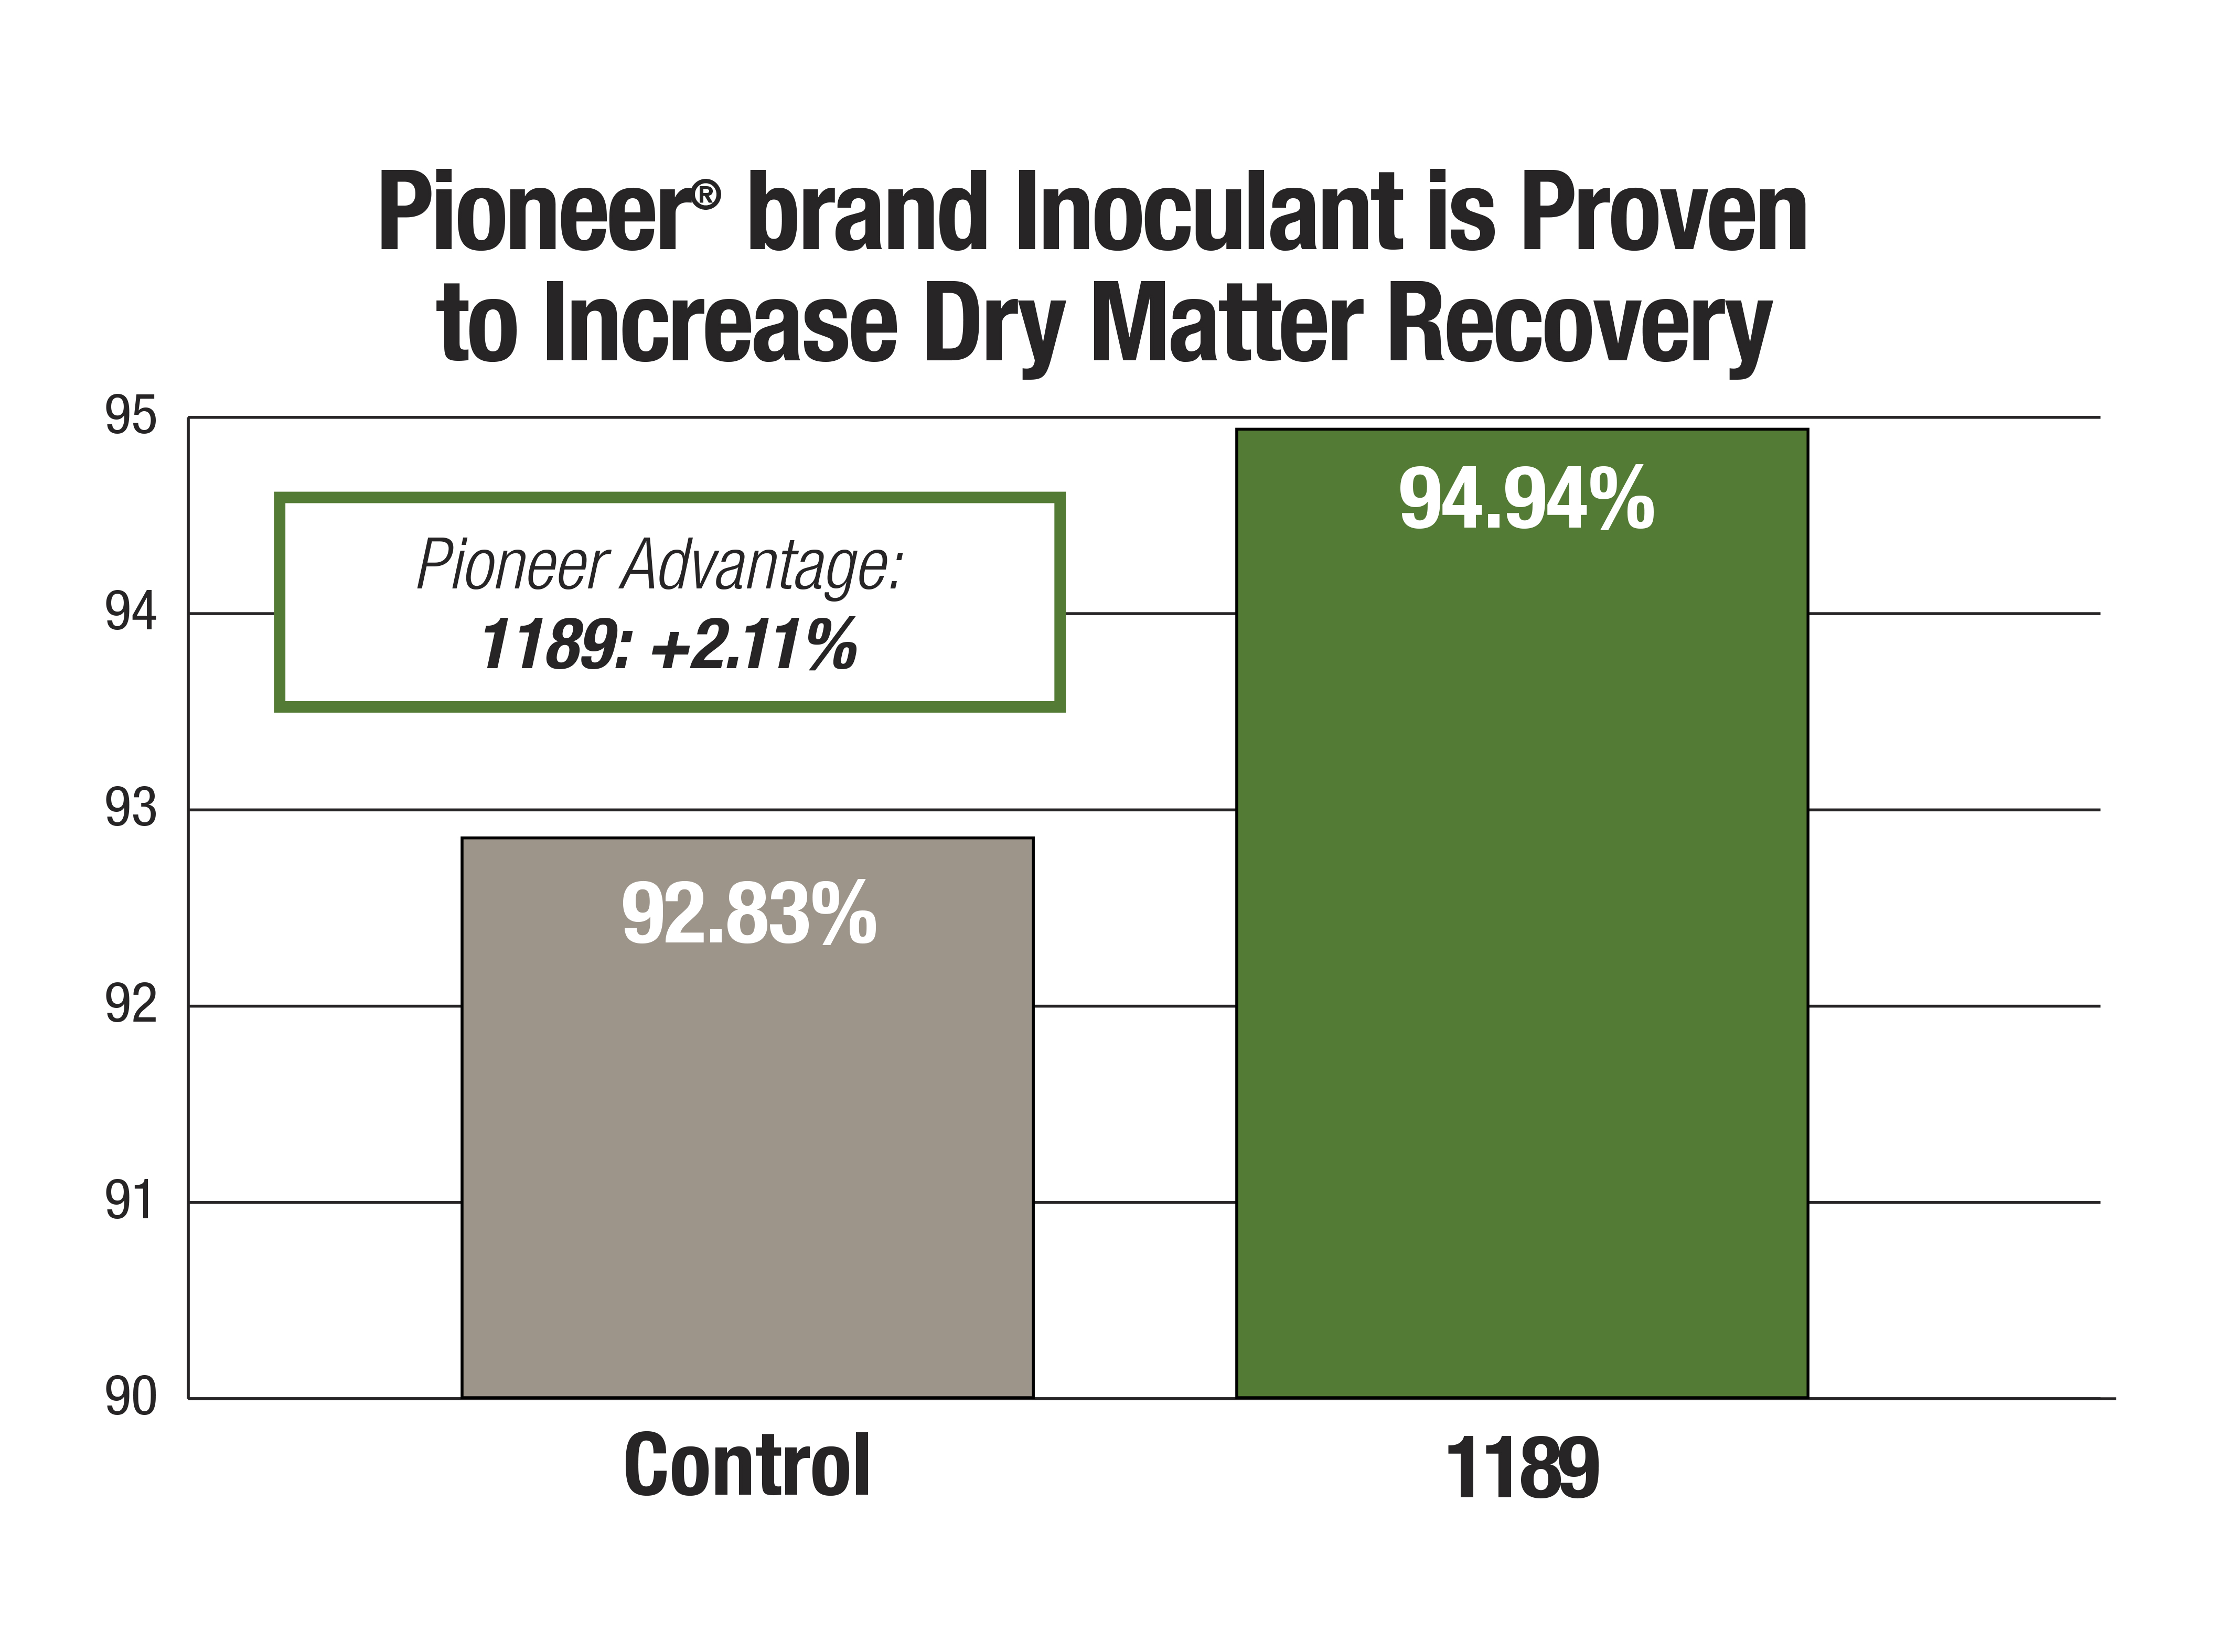 1189 - Increase in Dry Matter Recovery